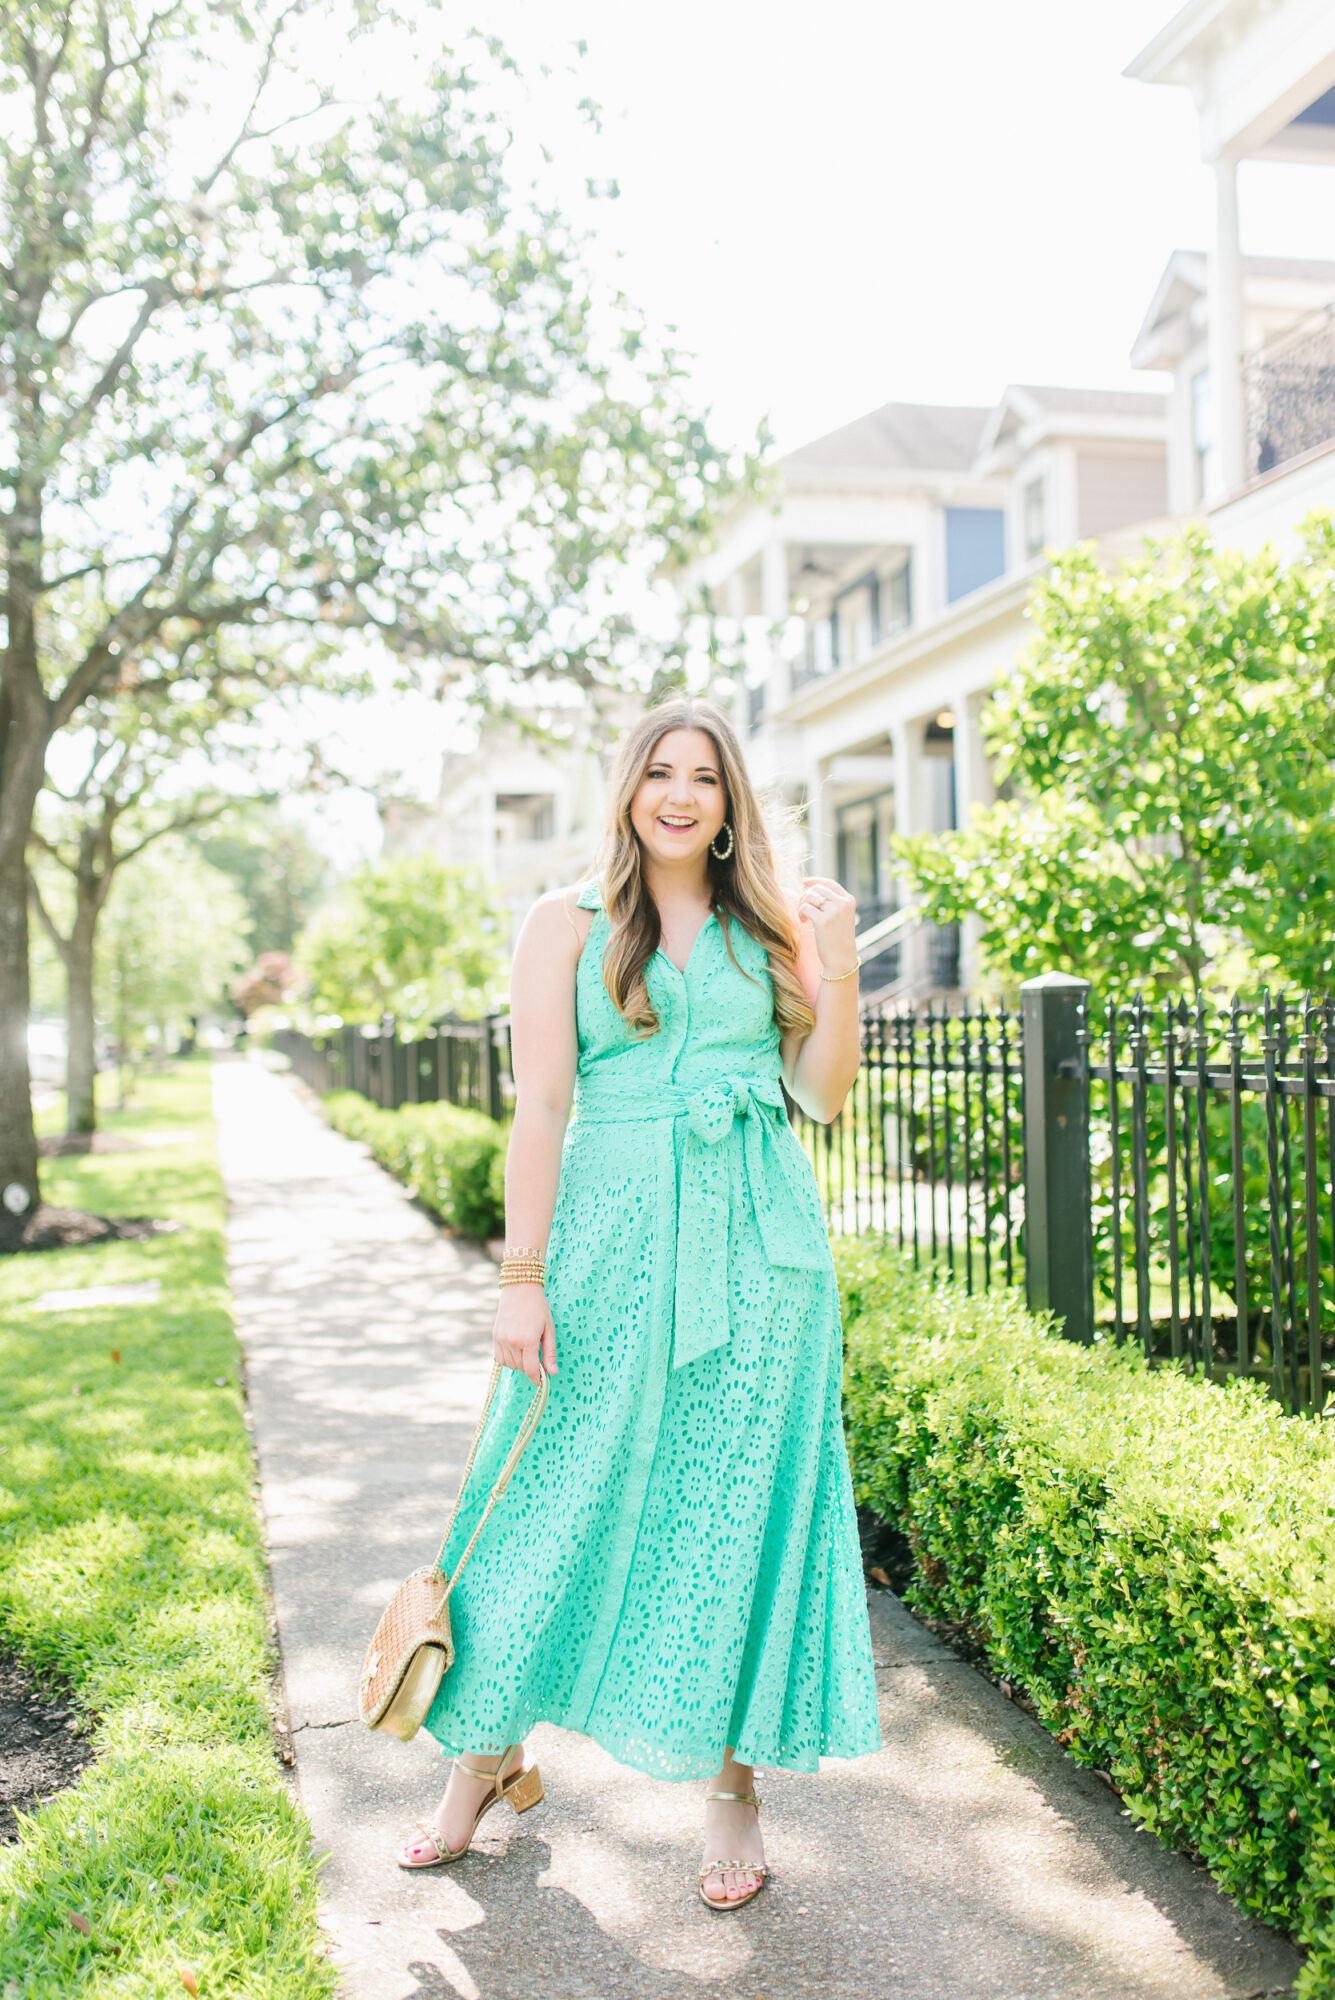 Lilly Pulitzer Summer 2021 Favorites - Thrifty Pineapple